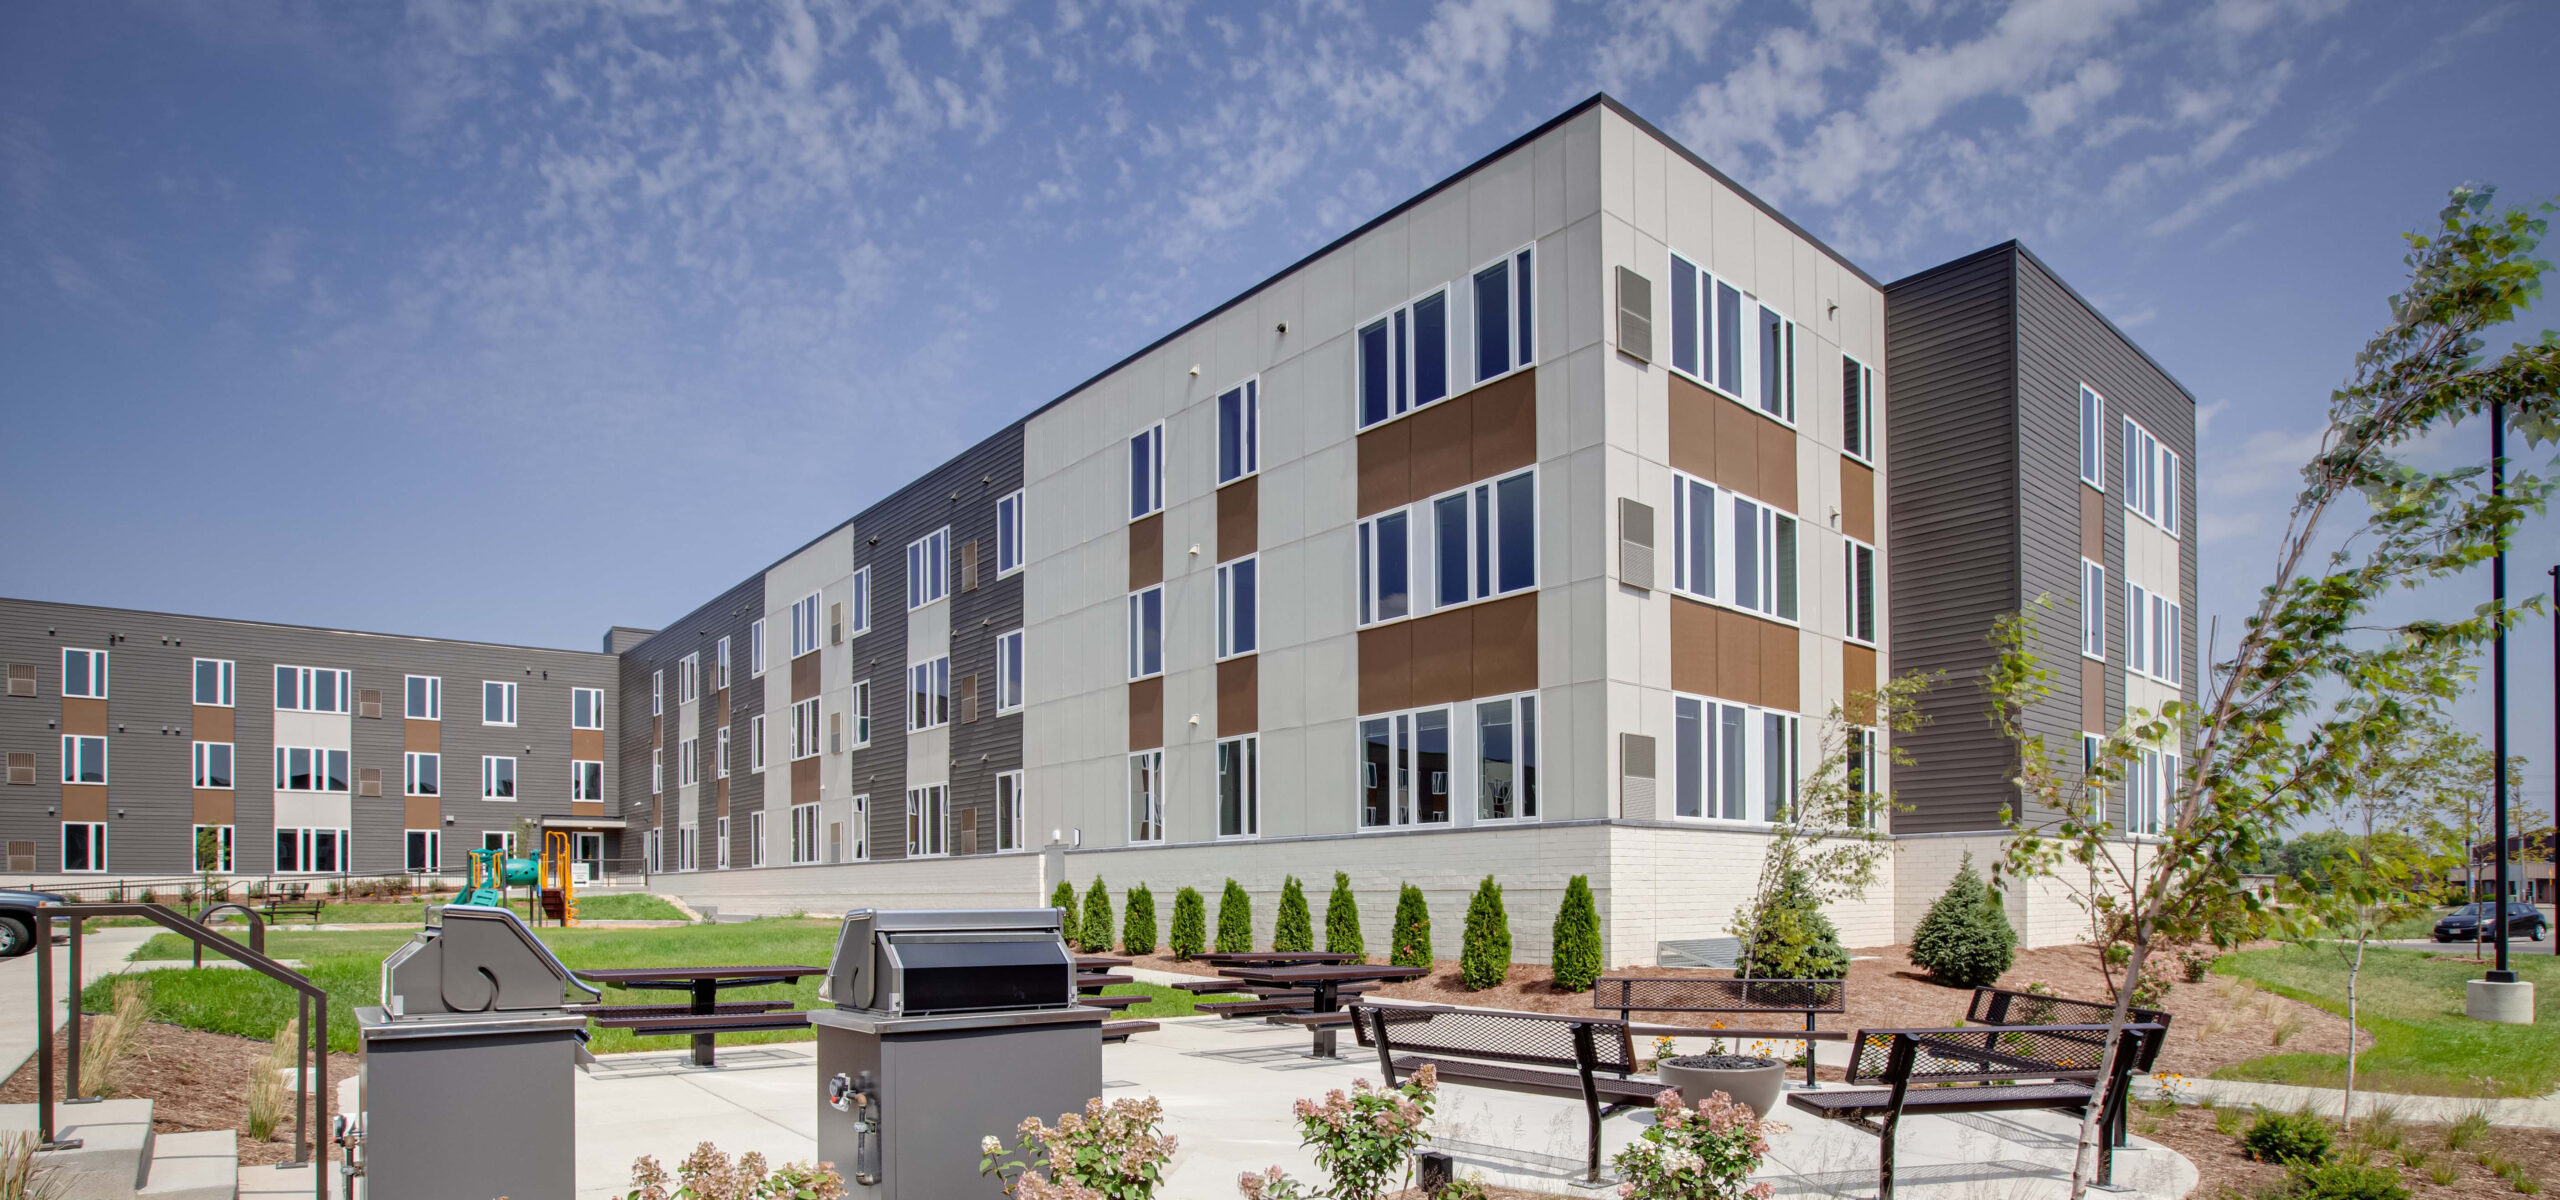 McShane Delivers 172 Affordable Apartments in Sun Prairie, Wisconsin